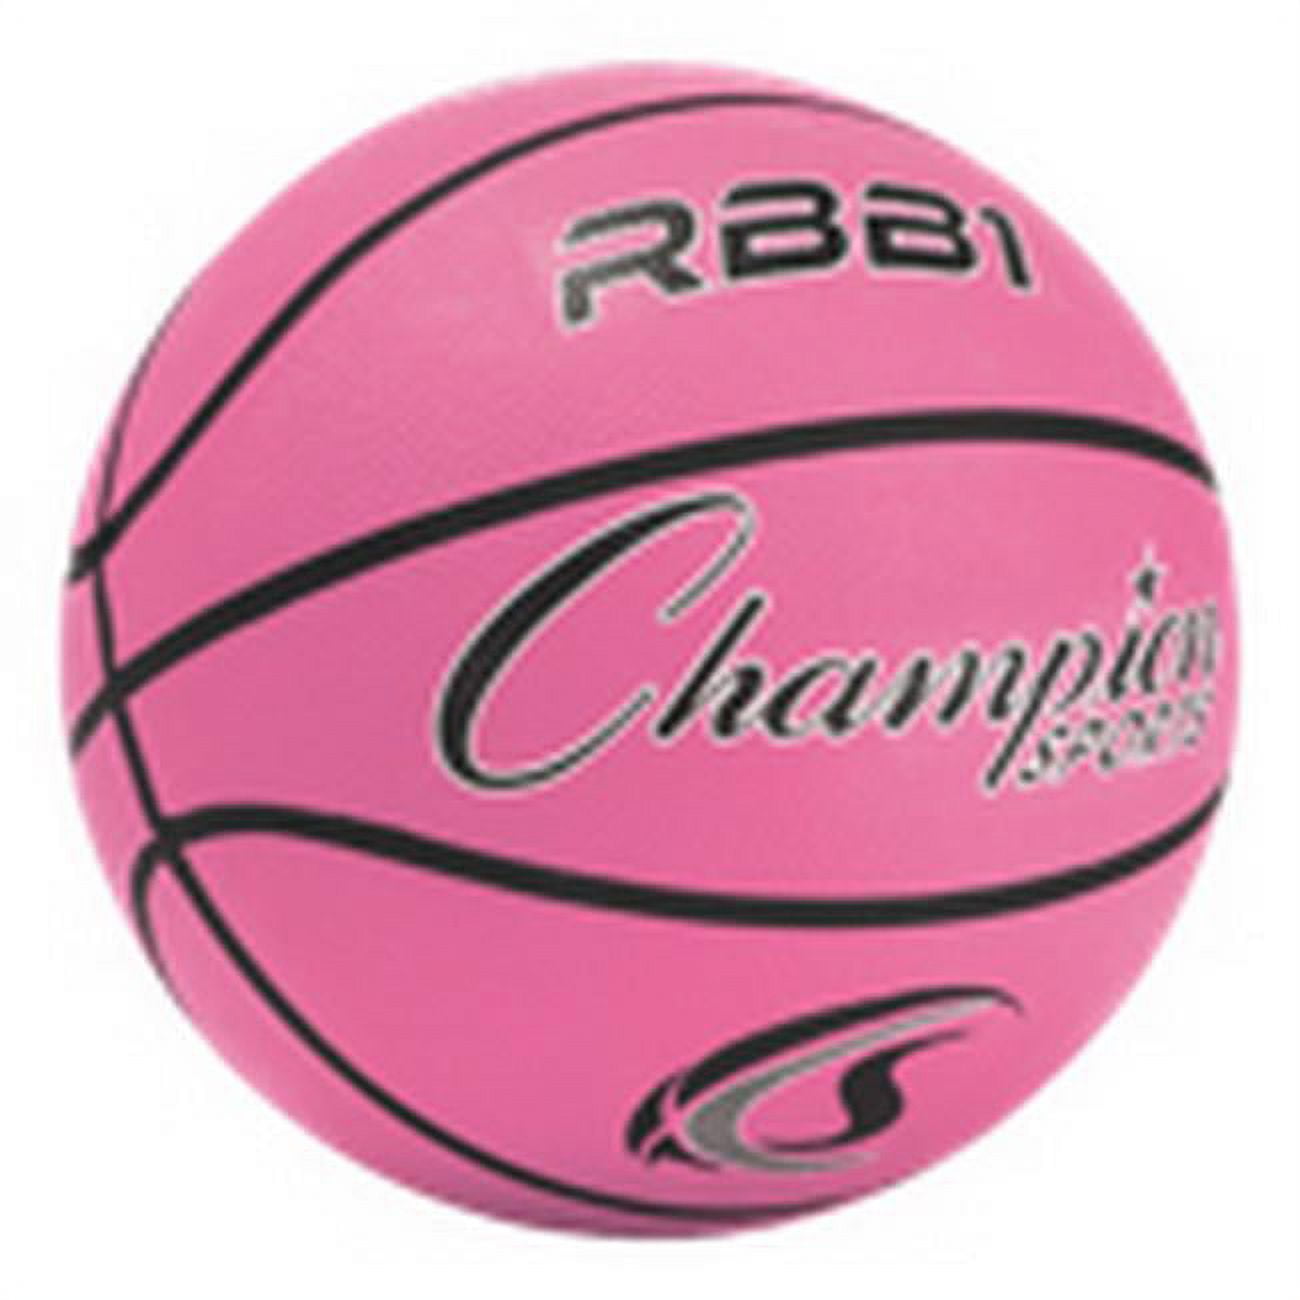 Picture of Champion Sports RBB1PK Rubber Basketball, Pink - Size 7